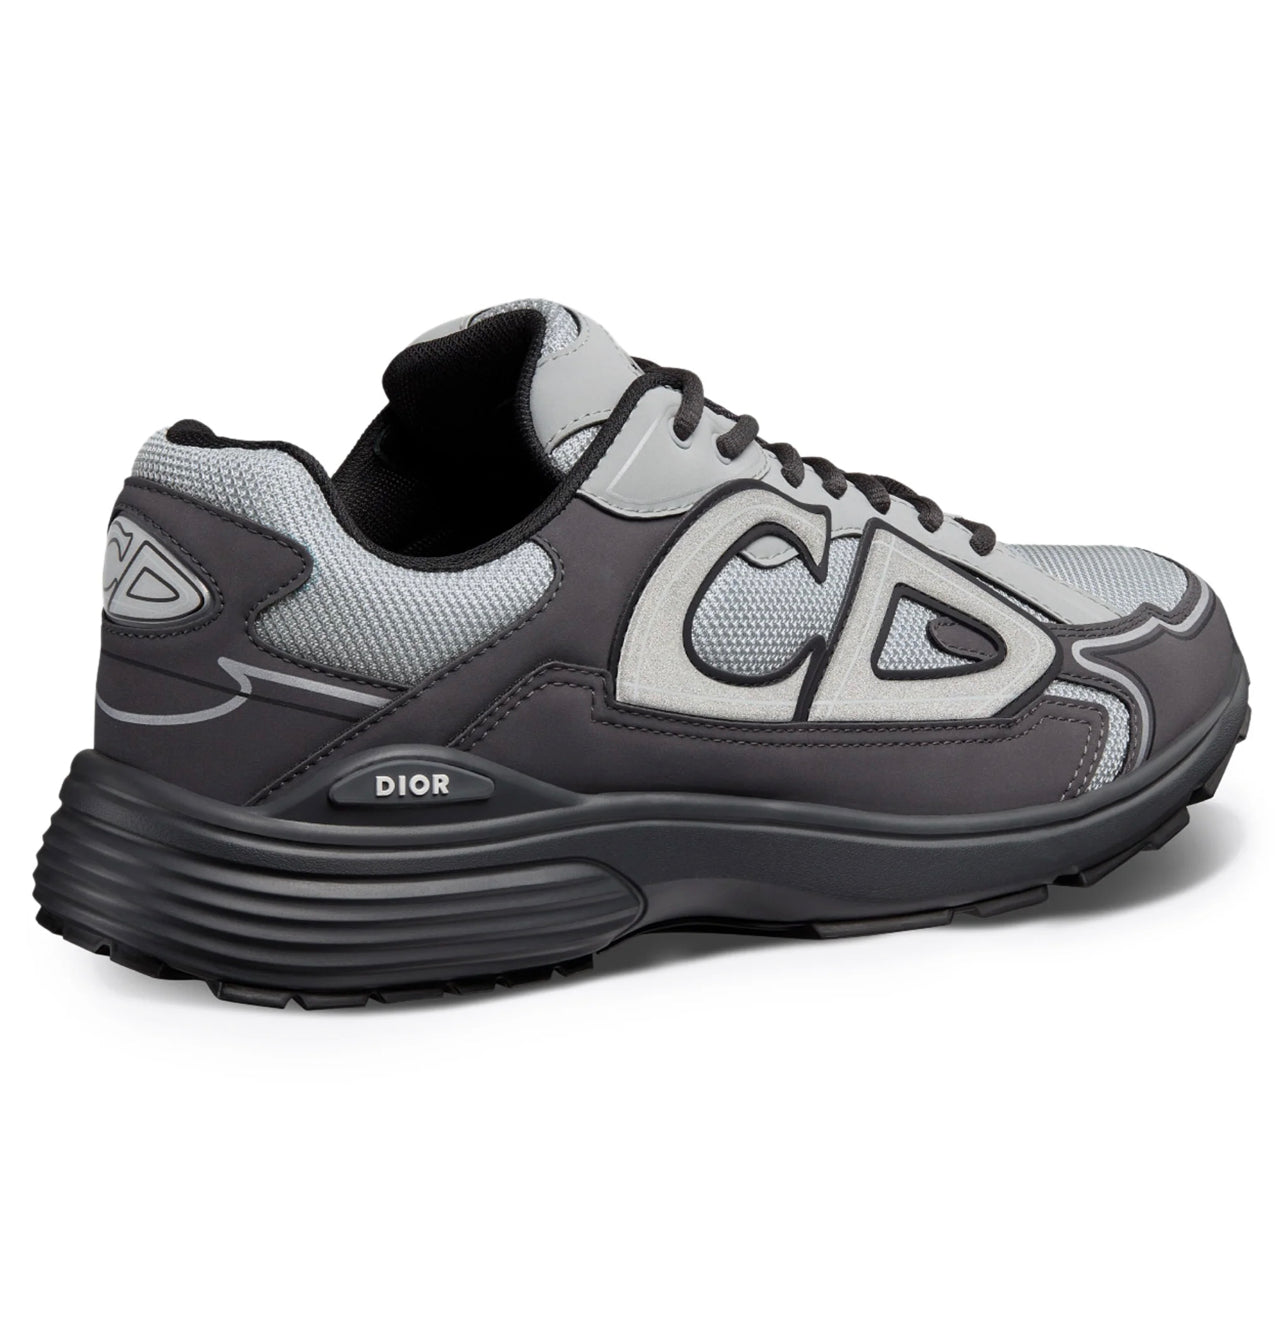 DIOR B30 TECHNICAL GREY ANTHRACITE TRAINER